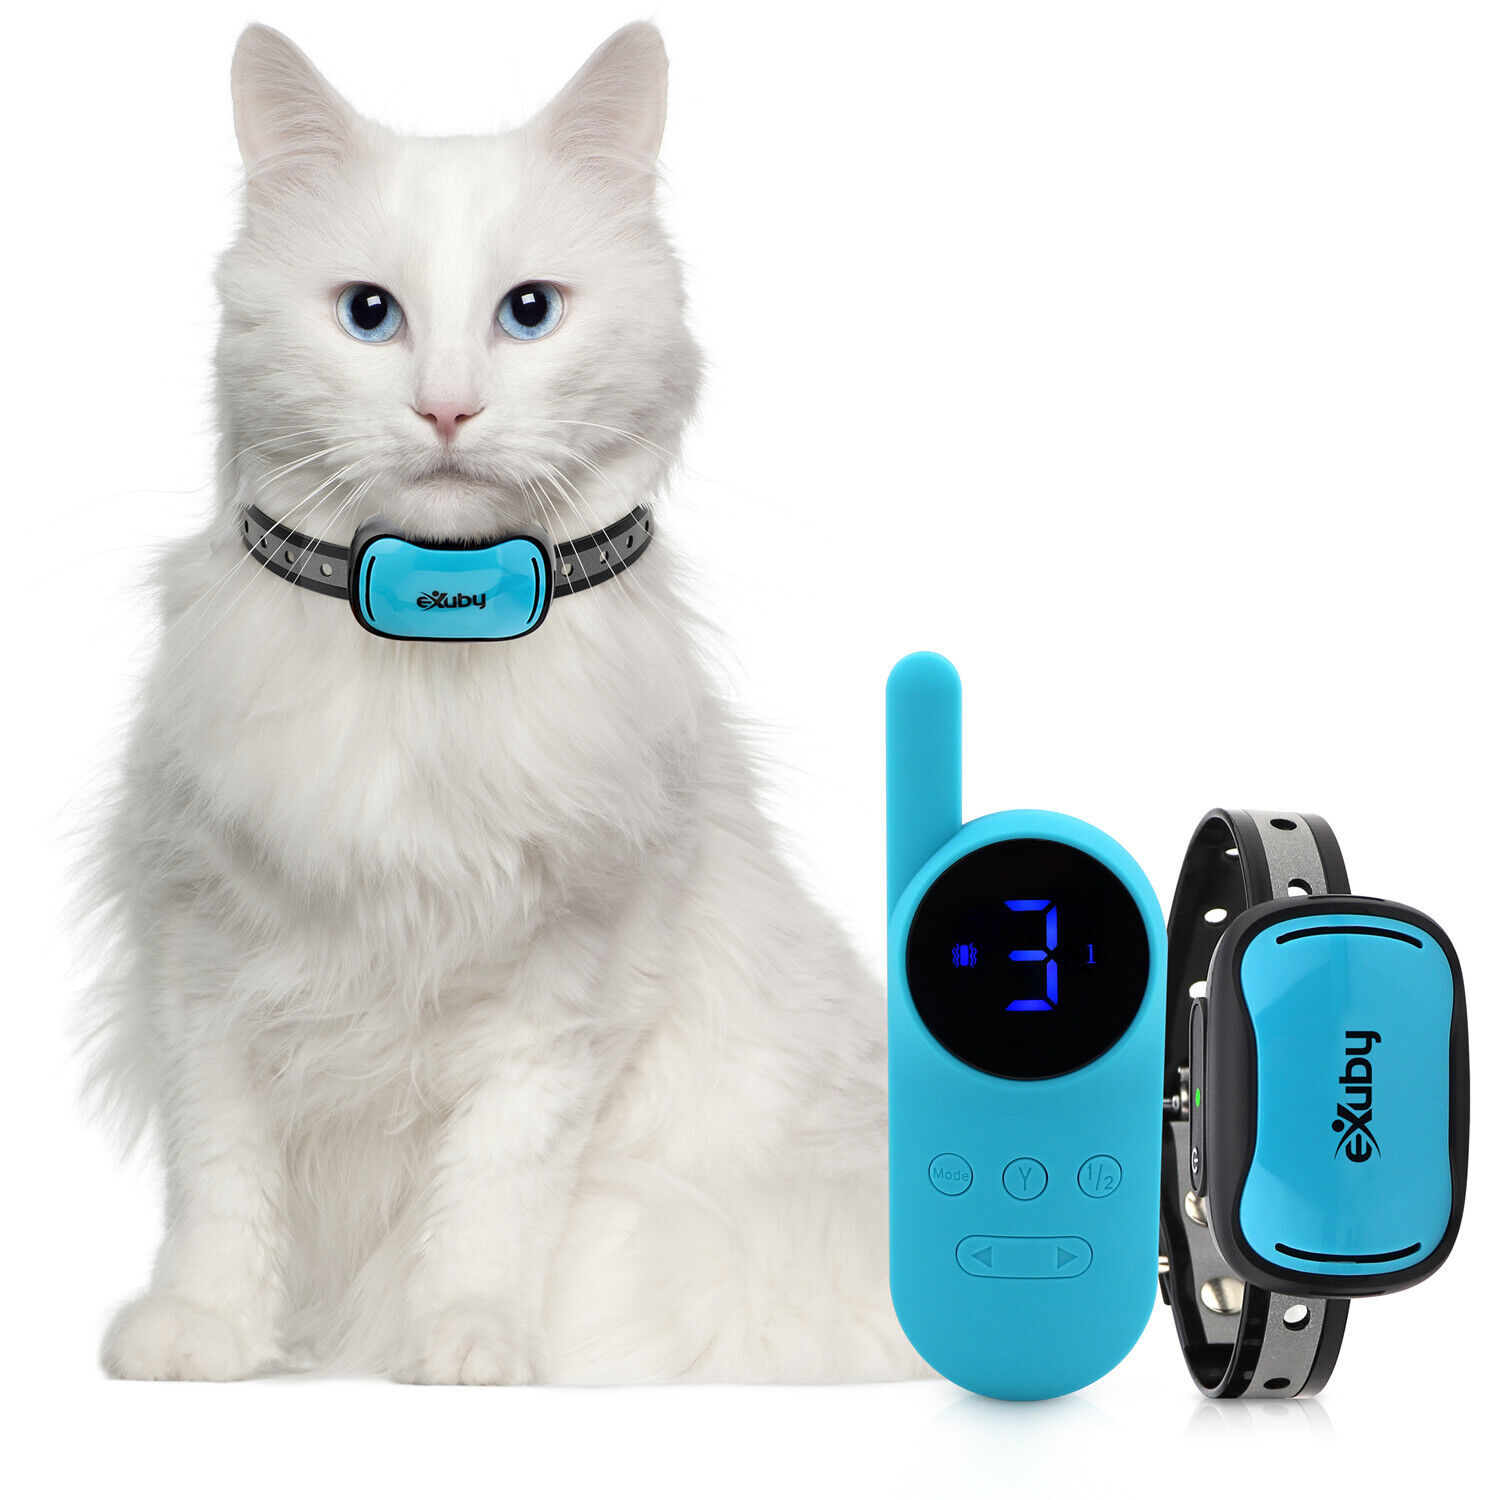 eXuby - Cat Shock Collar w/Remote - Sound, Vibrate & Shock Mode - Teal Remote